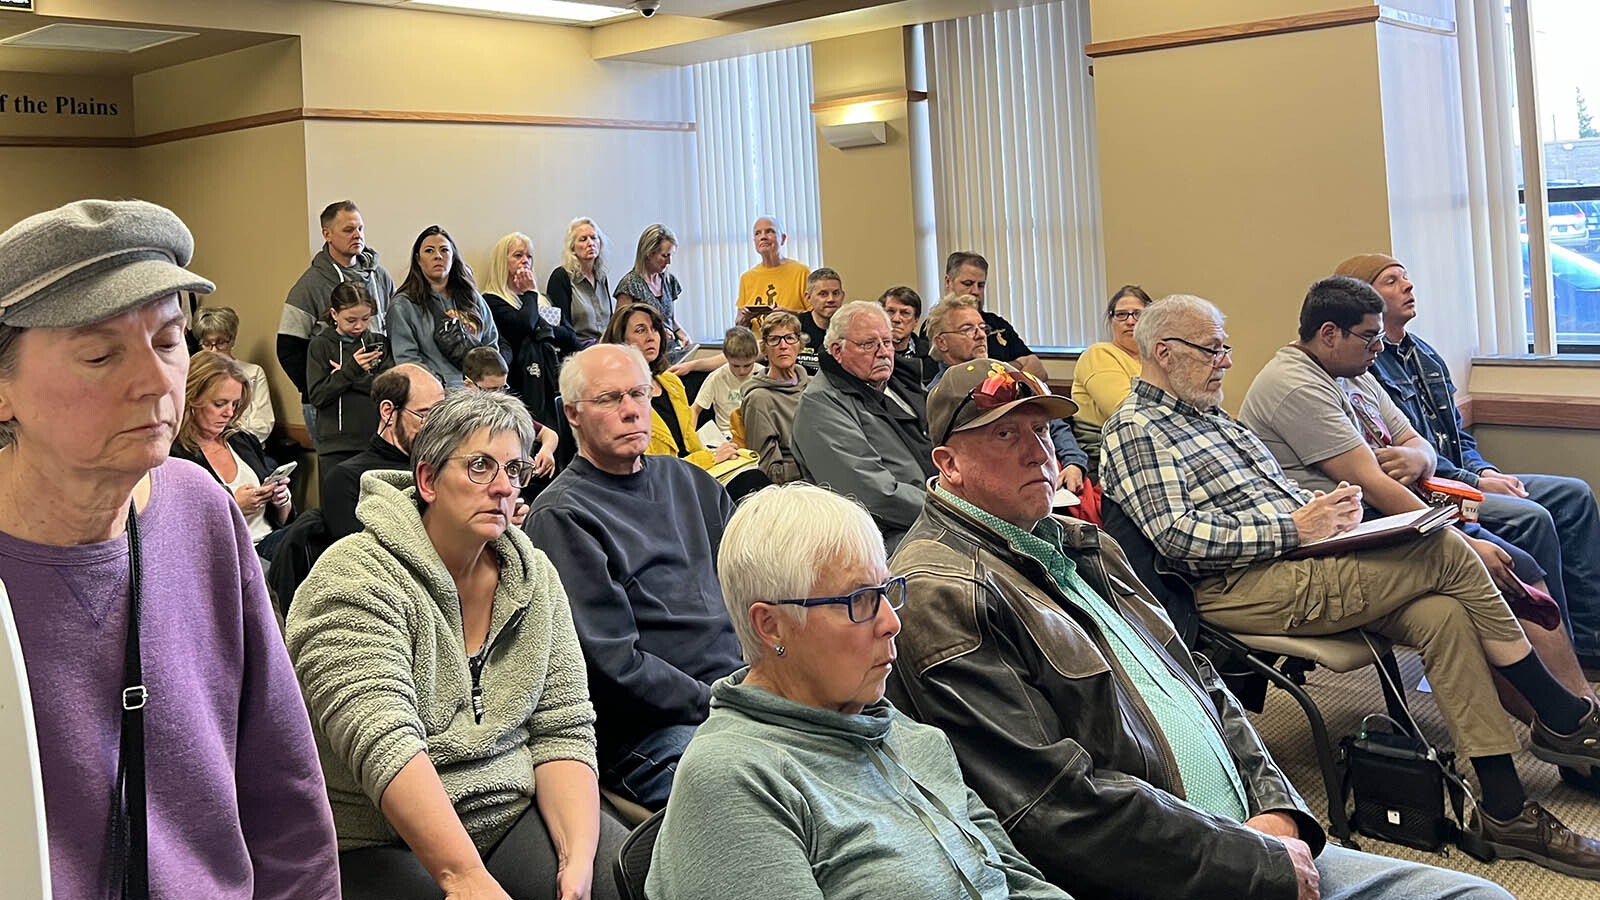 It was standing room only at the Laramie City Council meeting late Tuesday, when residents and business owners turned out to testify against a proposed apartment building in the heart of downtown.